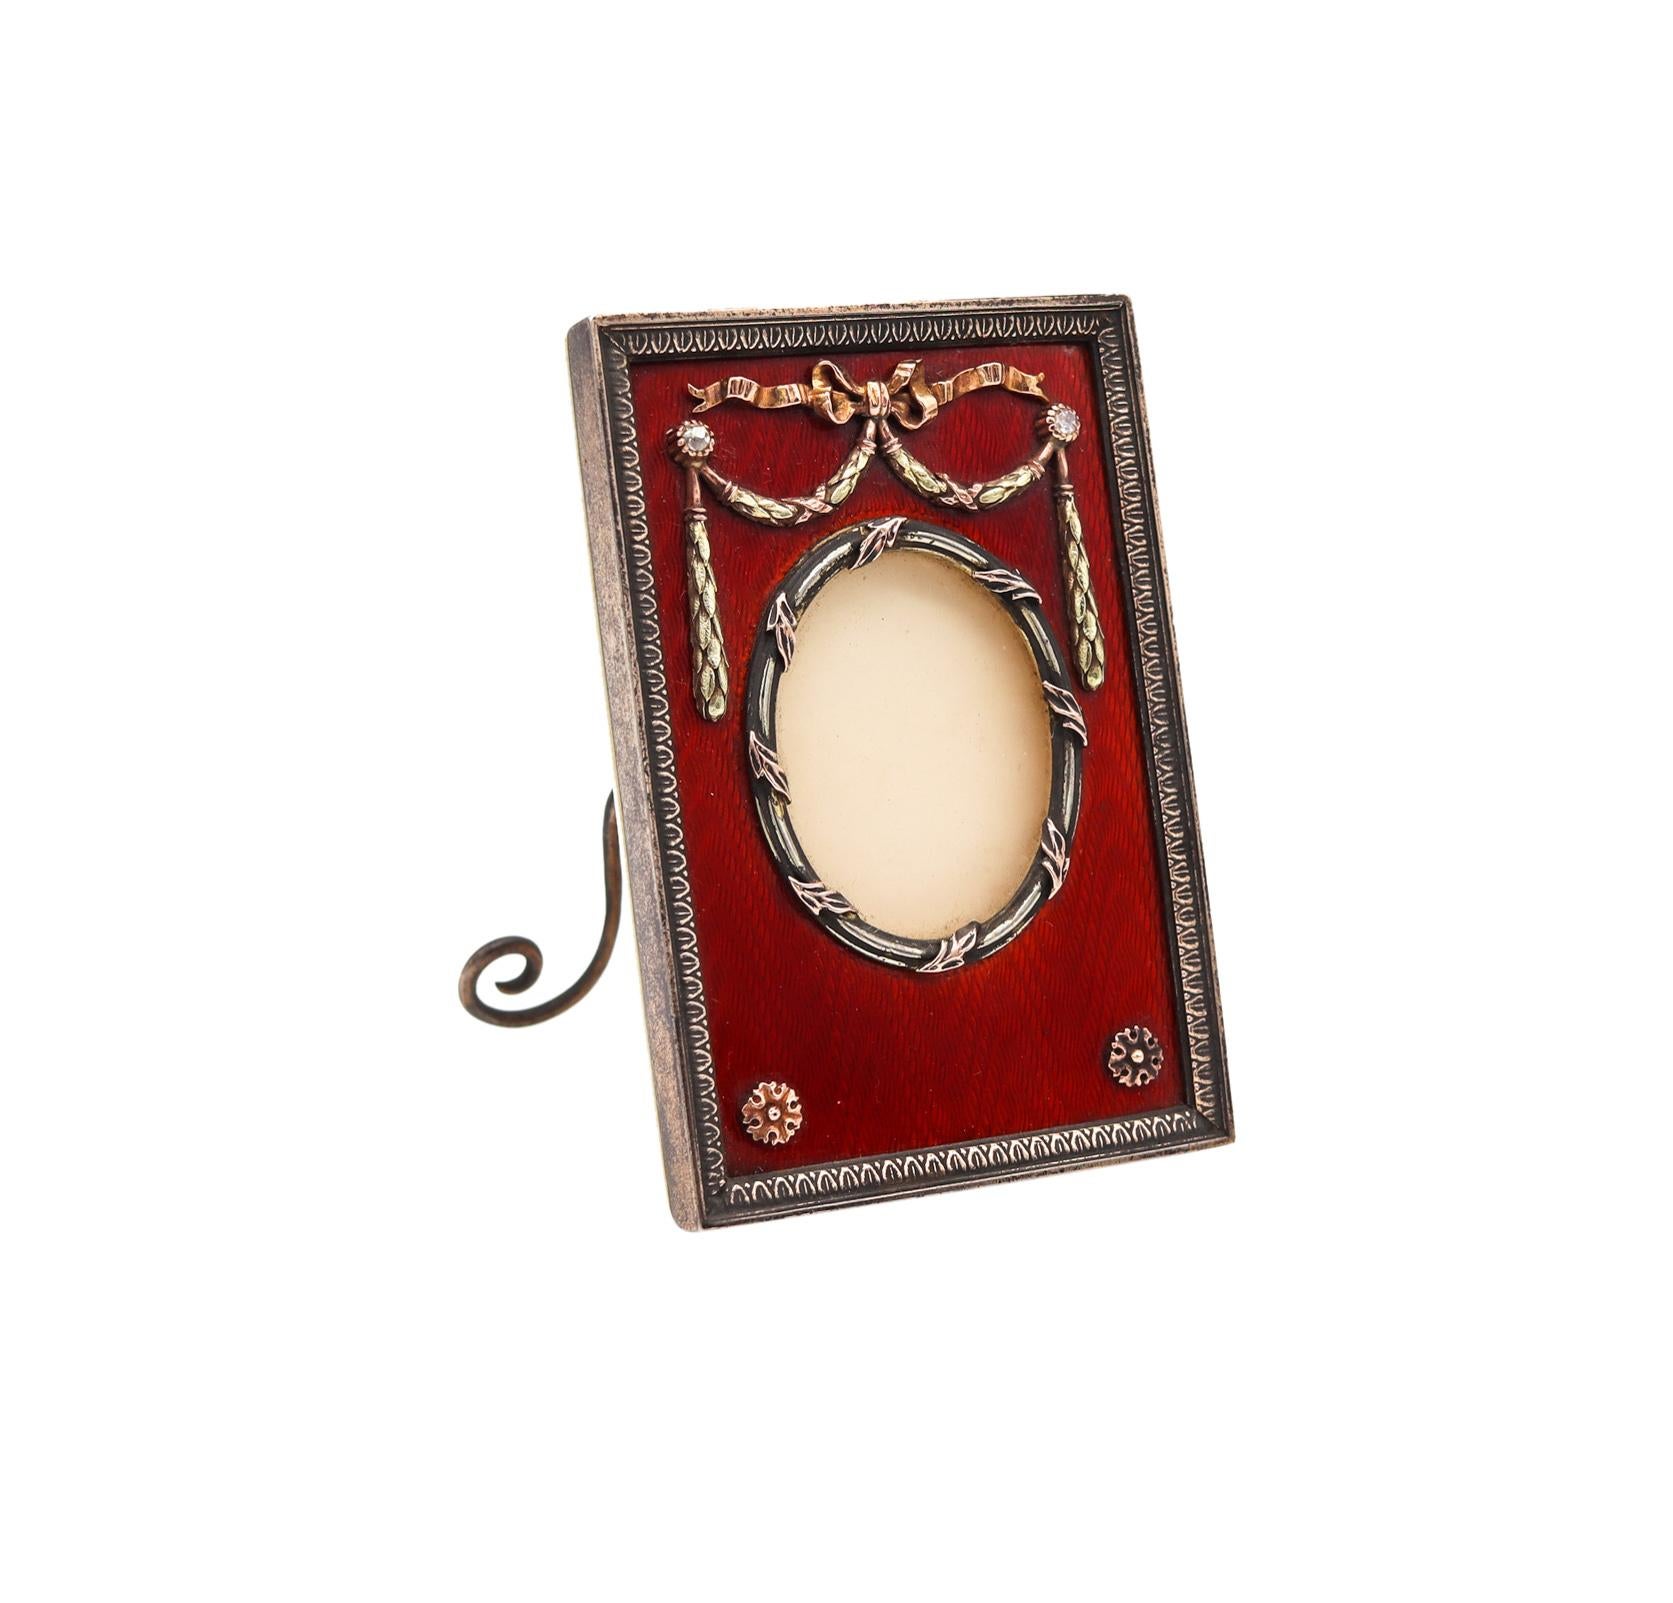 Early 20th Century Henrik Wigström Russia Imperial 1915 Red Enamel Picture Frame In Gilded Sterling For Sale